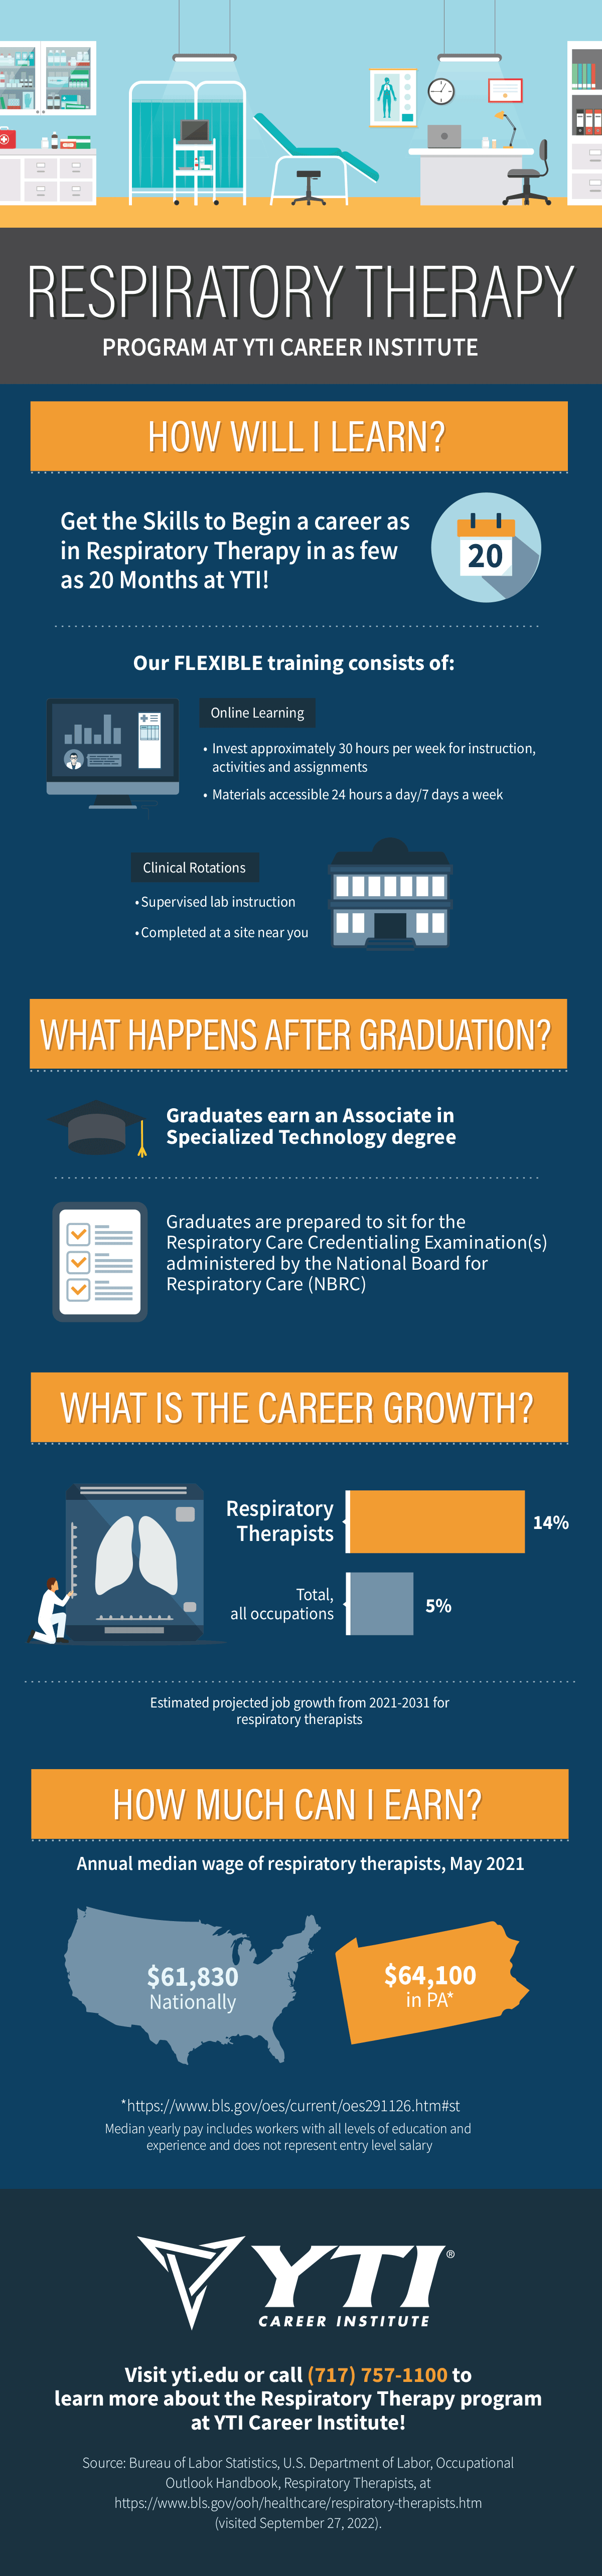 Respiratory Therapy Program Facts Infographic